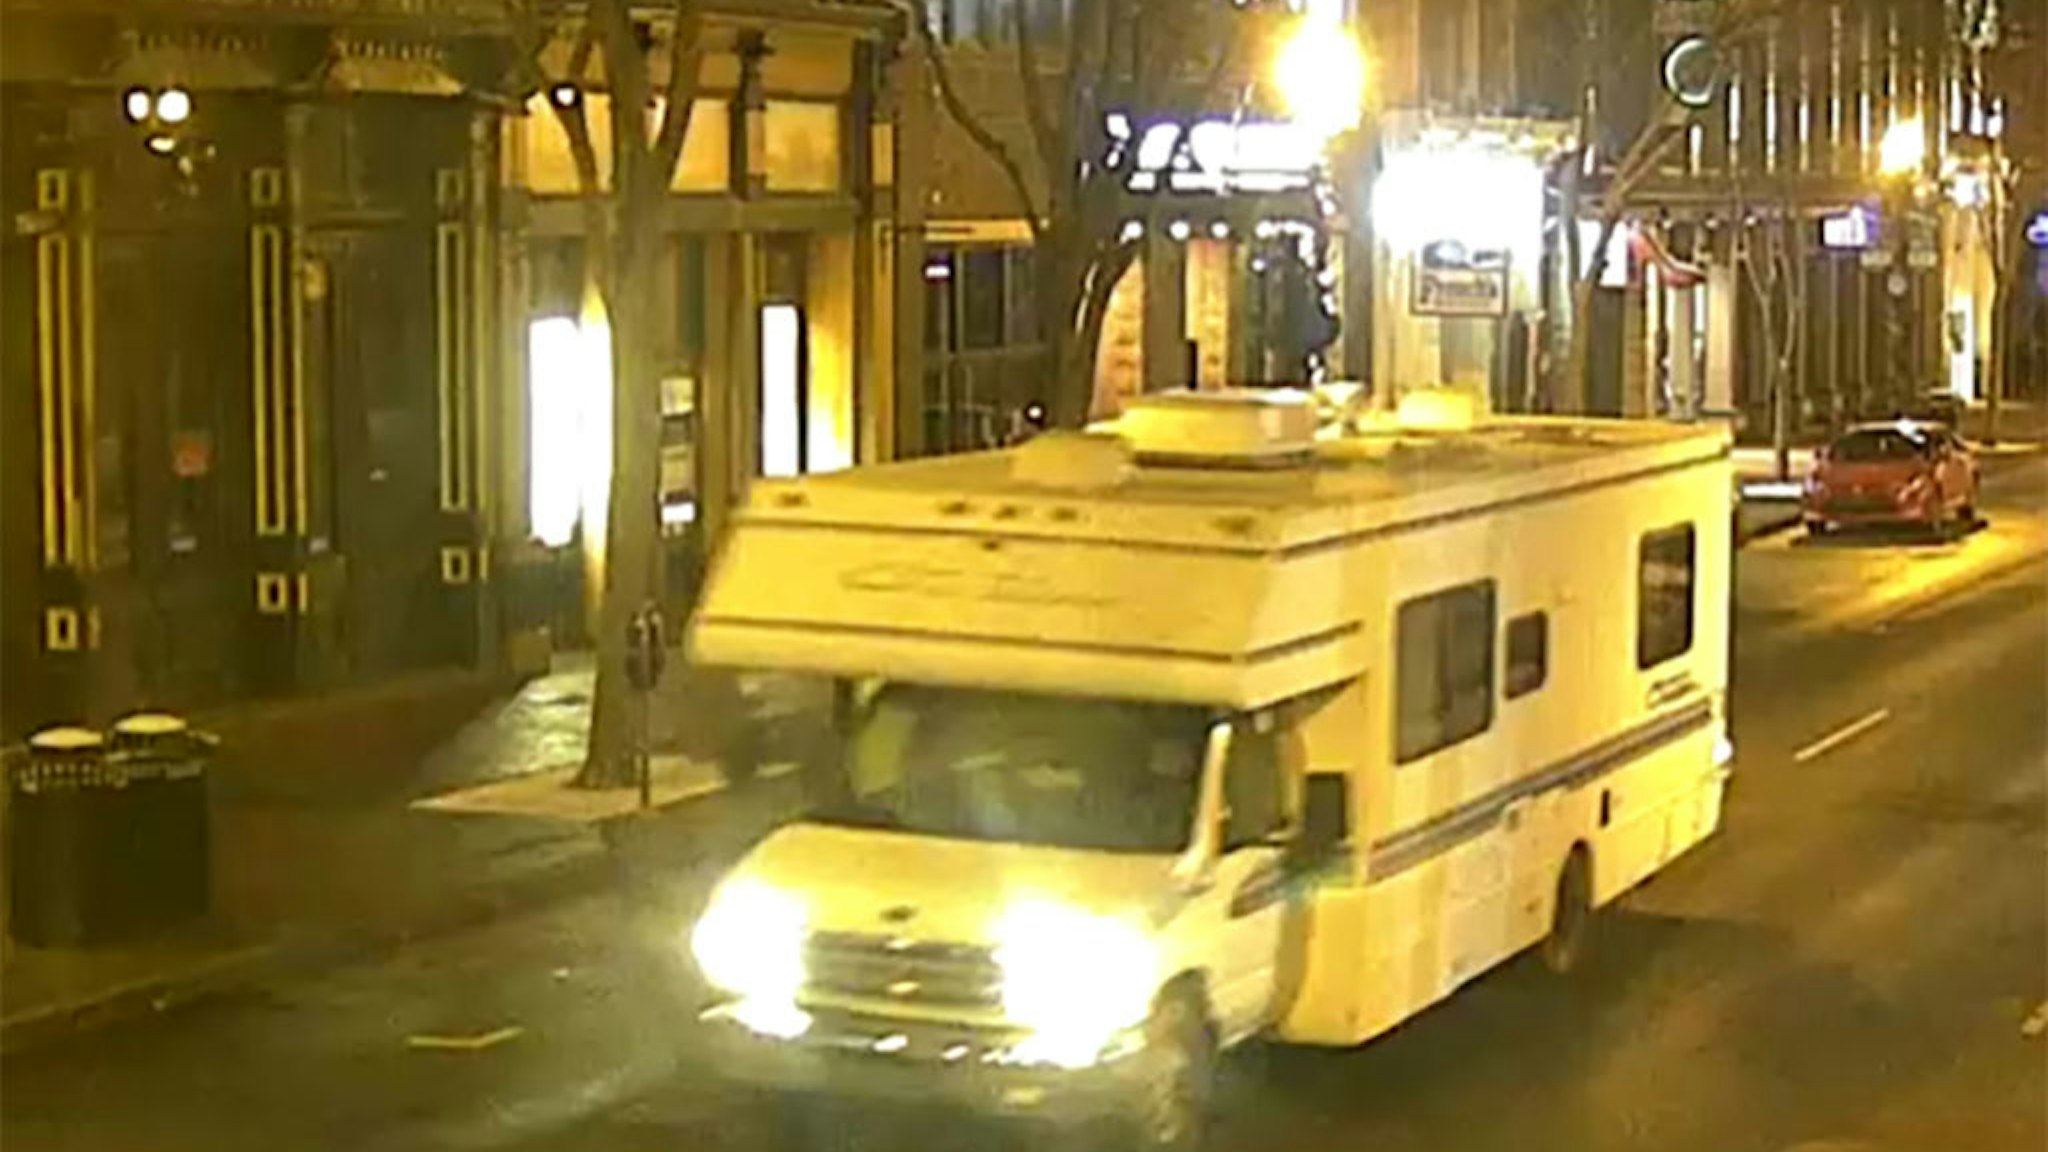 NASHVILLE, TENNESSEE - DECEMBER 25: In this handout image provided by the Metro Nashville Police Department, a screengrab of surveillance footage shows the recreational vehicle suspected of being used in the Christmas day bombing on December 25, 2020 in Nashville, Tennessee. A Hazardous Devices Unit was en route to check on a recreational vehicle which then exploded, extensively damaging some nearby buildings. According to reports, the police believe the explosion to be intentional, with at least 3 injured and human remains found in the vicinity of the explosion. (Photo by Metro Nashville Police Department via Getty Images)